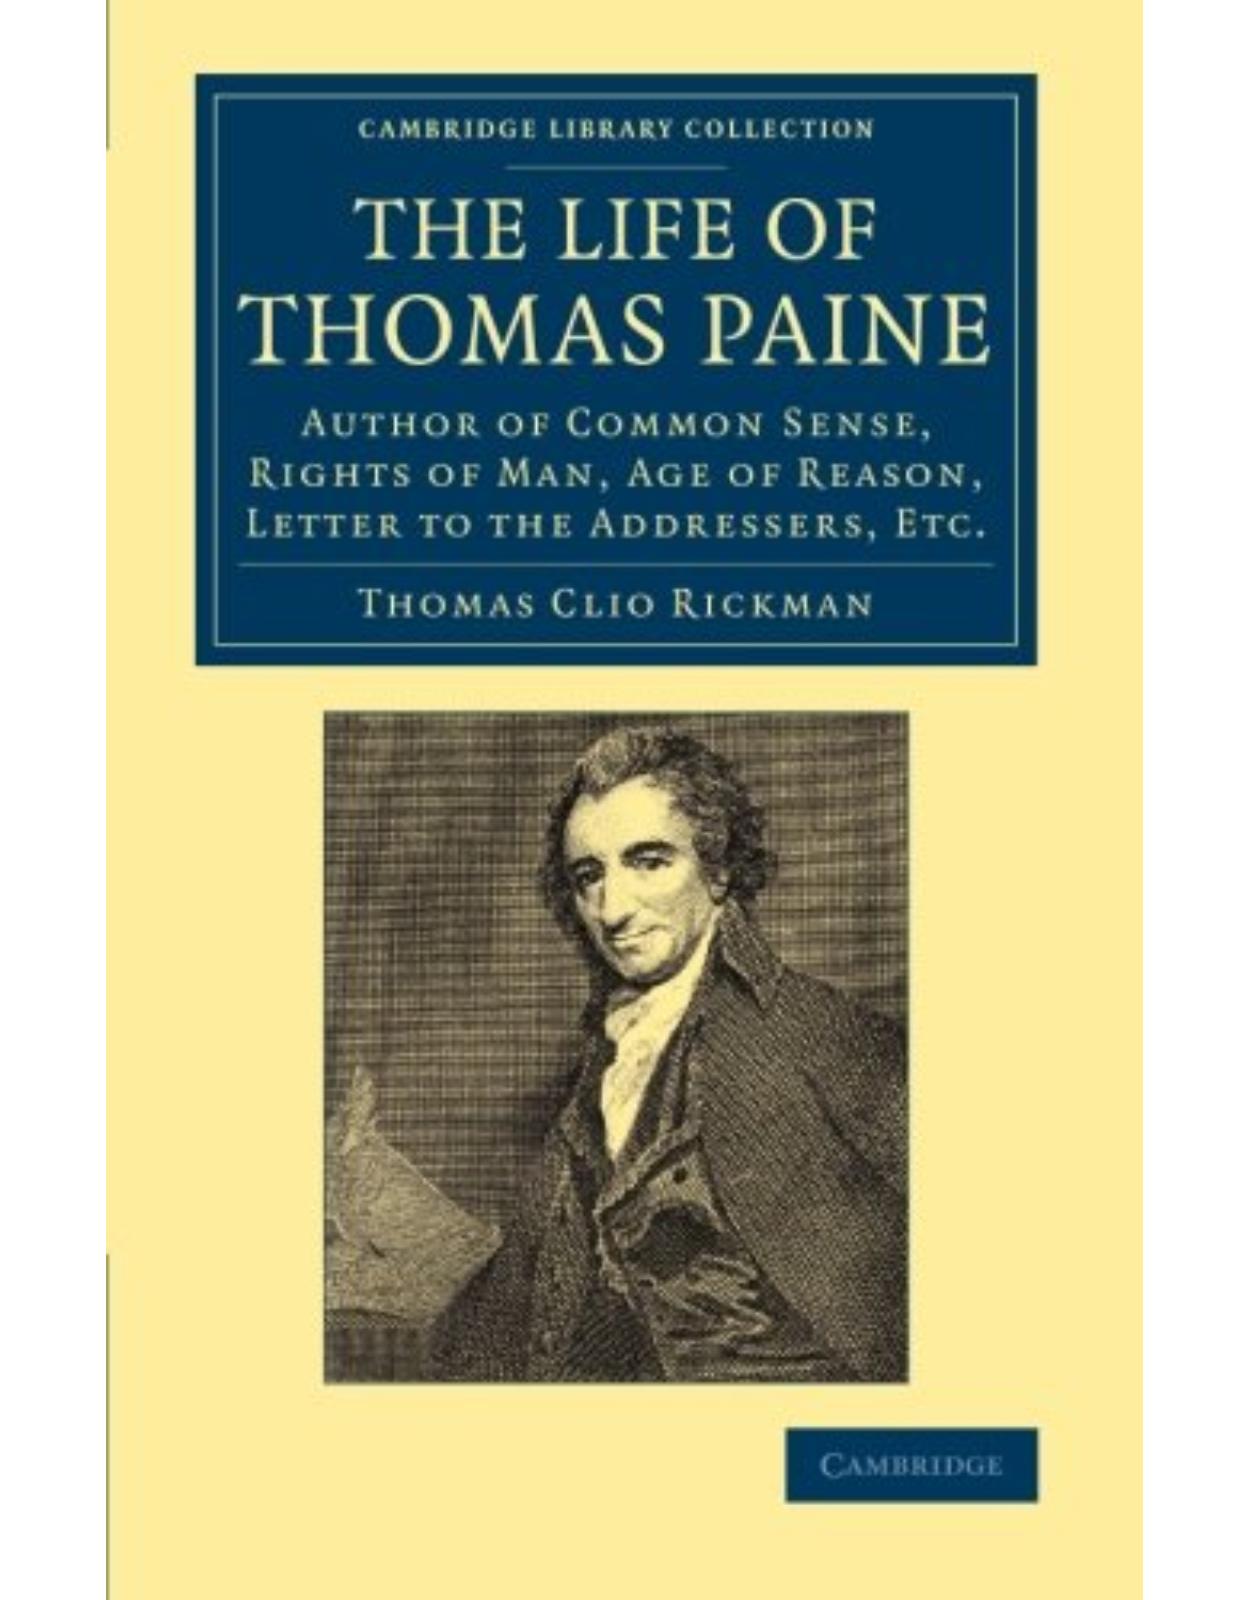 The Life of Thomas Paine: Author of Common Sense, Rights of Man, Age of Reason, Letter to the Addressers, Etc. (Cambridge Library Collection - British & Irish History, 17th & 18th Centuries)